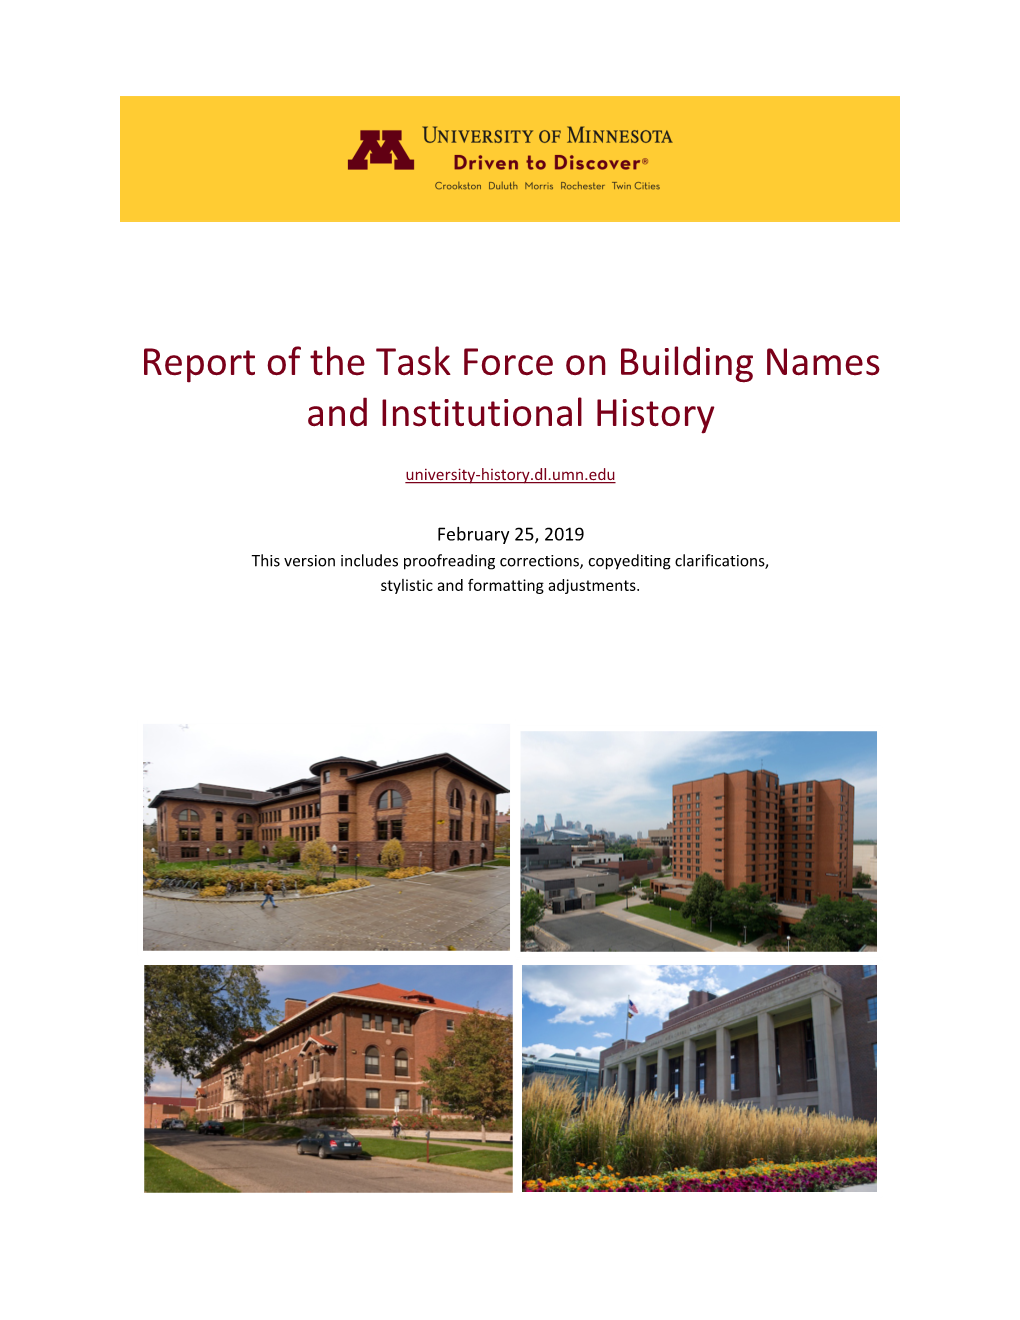 Report of the Task Force on Building Names and Institutional History